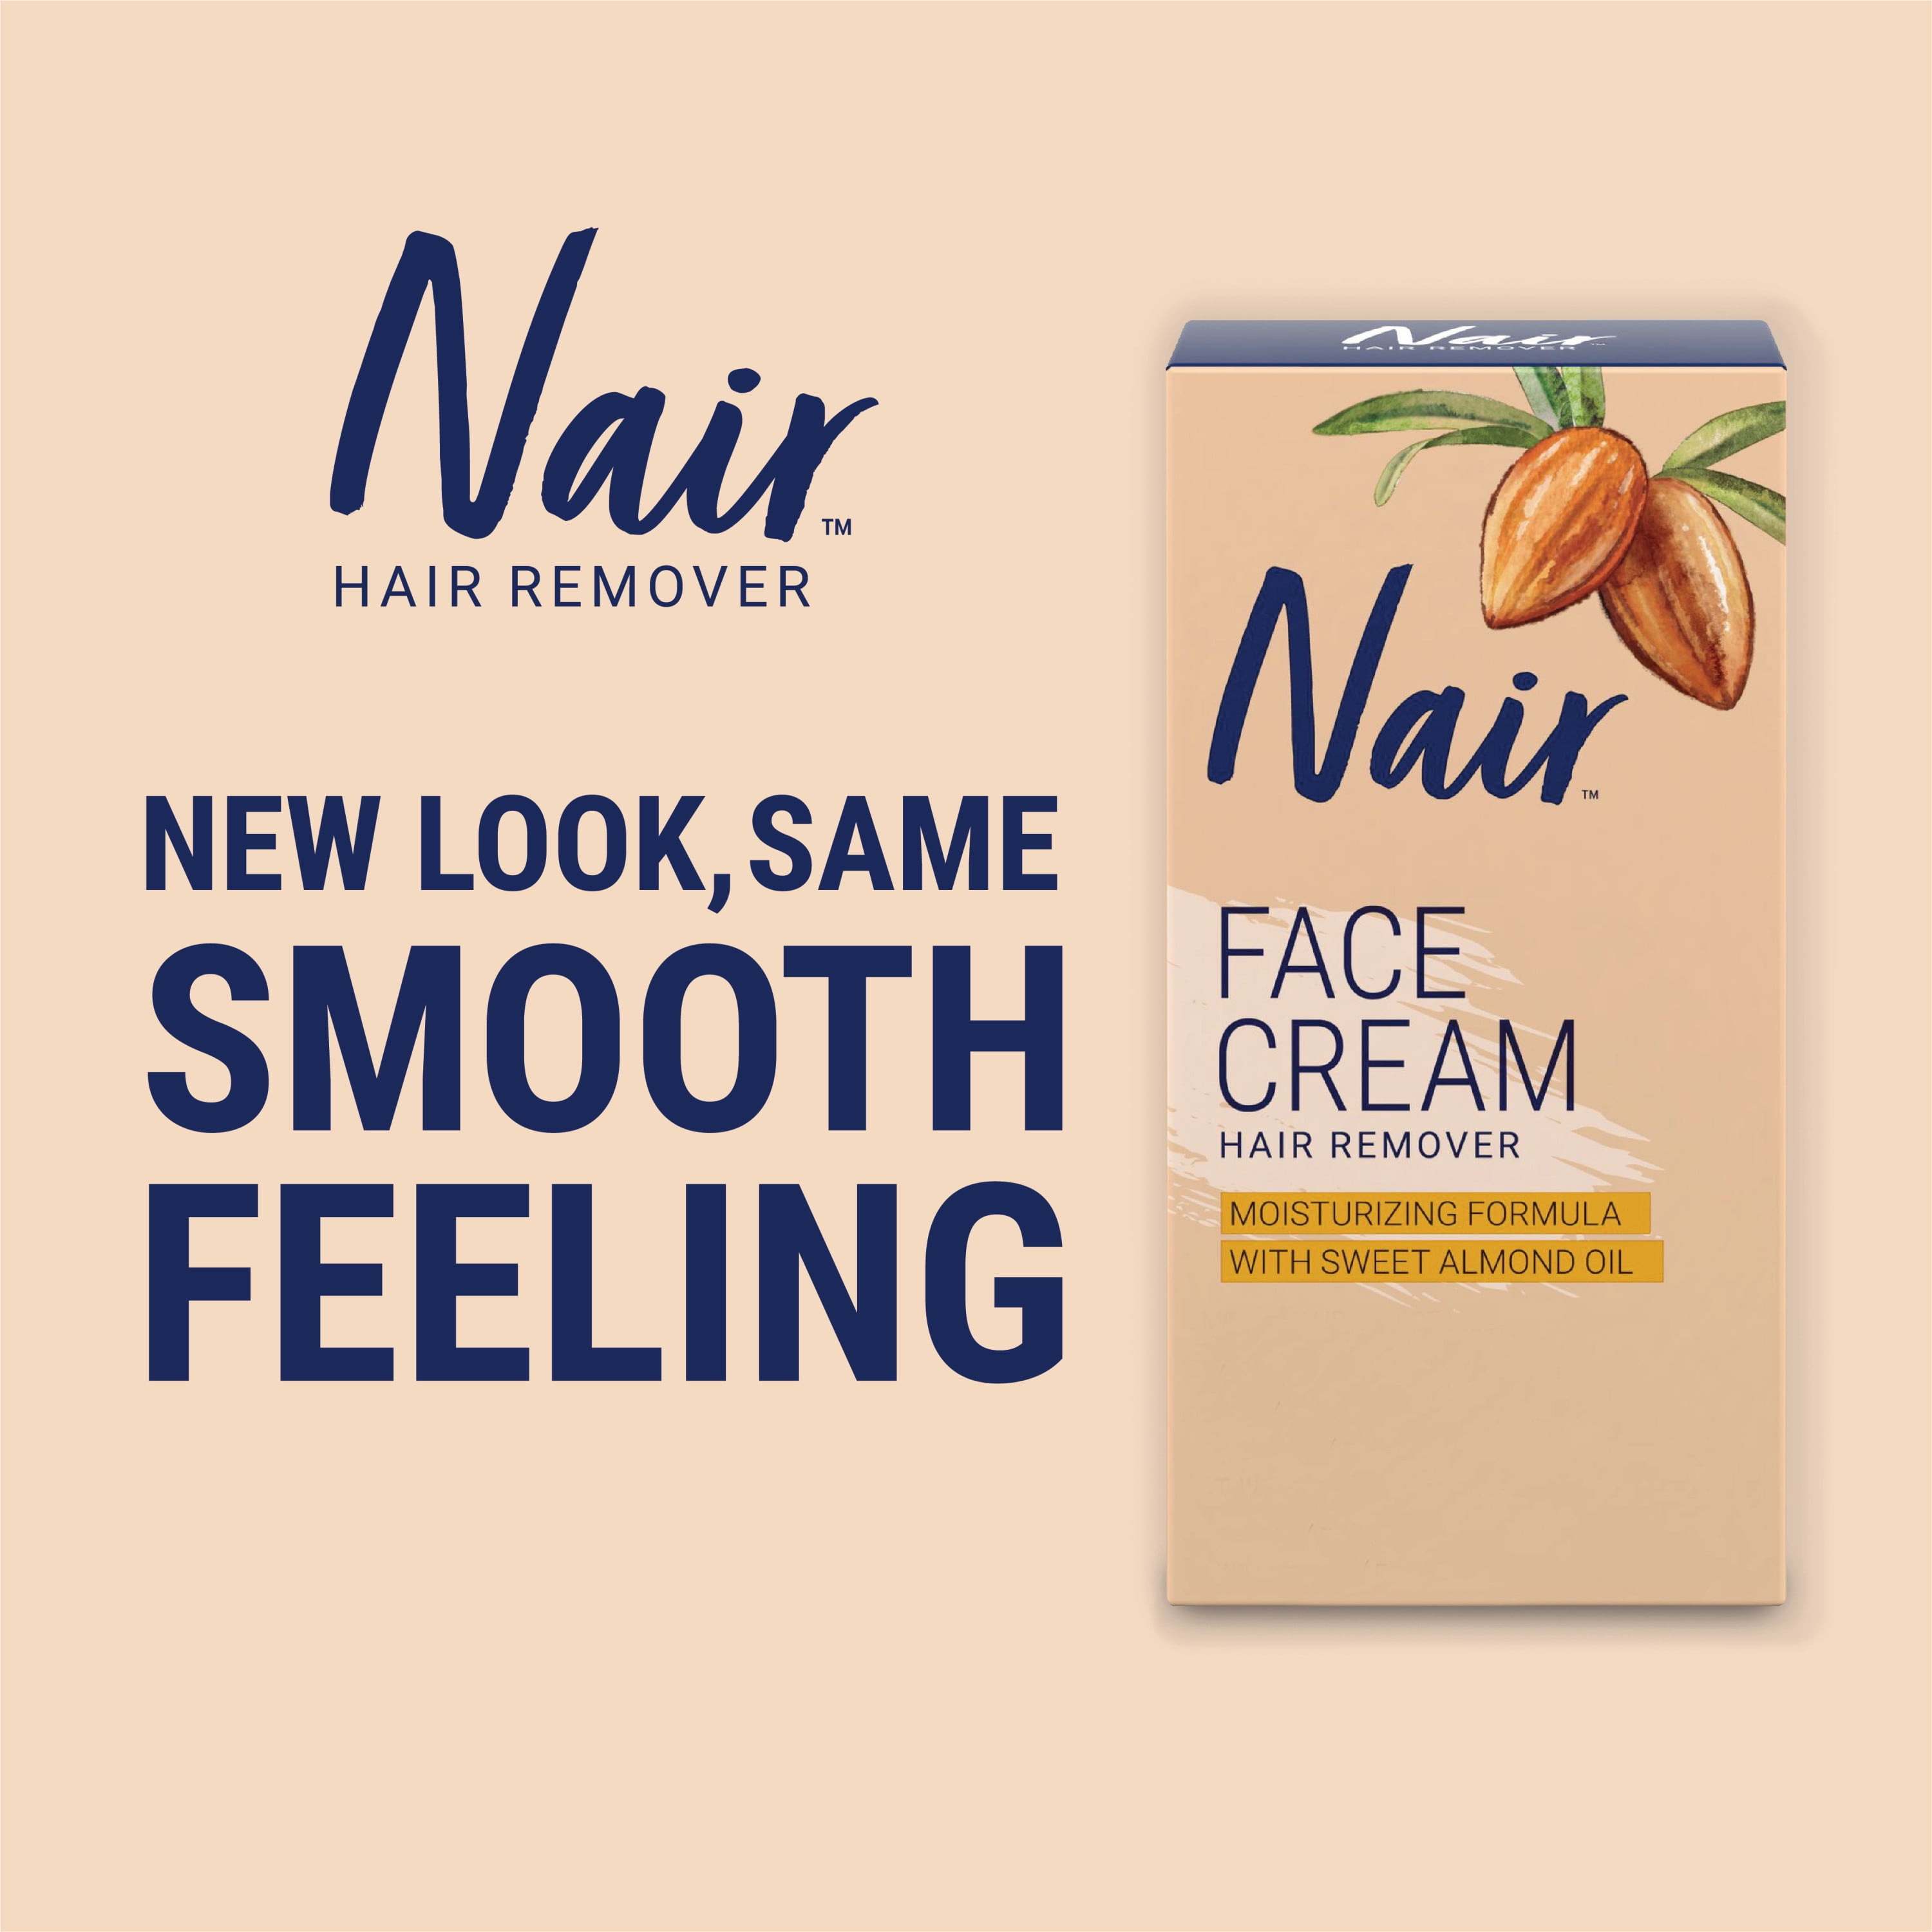 Nair Moisturizing Facial Hair Removal Cream With Sweet Almond Oil, #1 Depilatory Cream For Face, 2 oz Bottle, For All Skin Types image